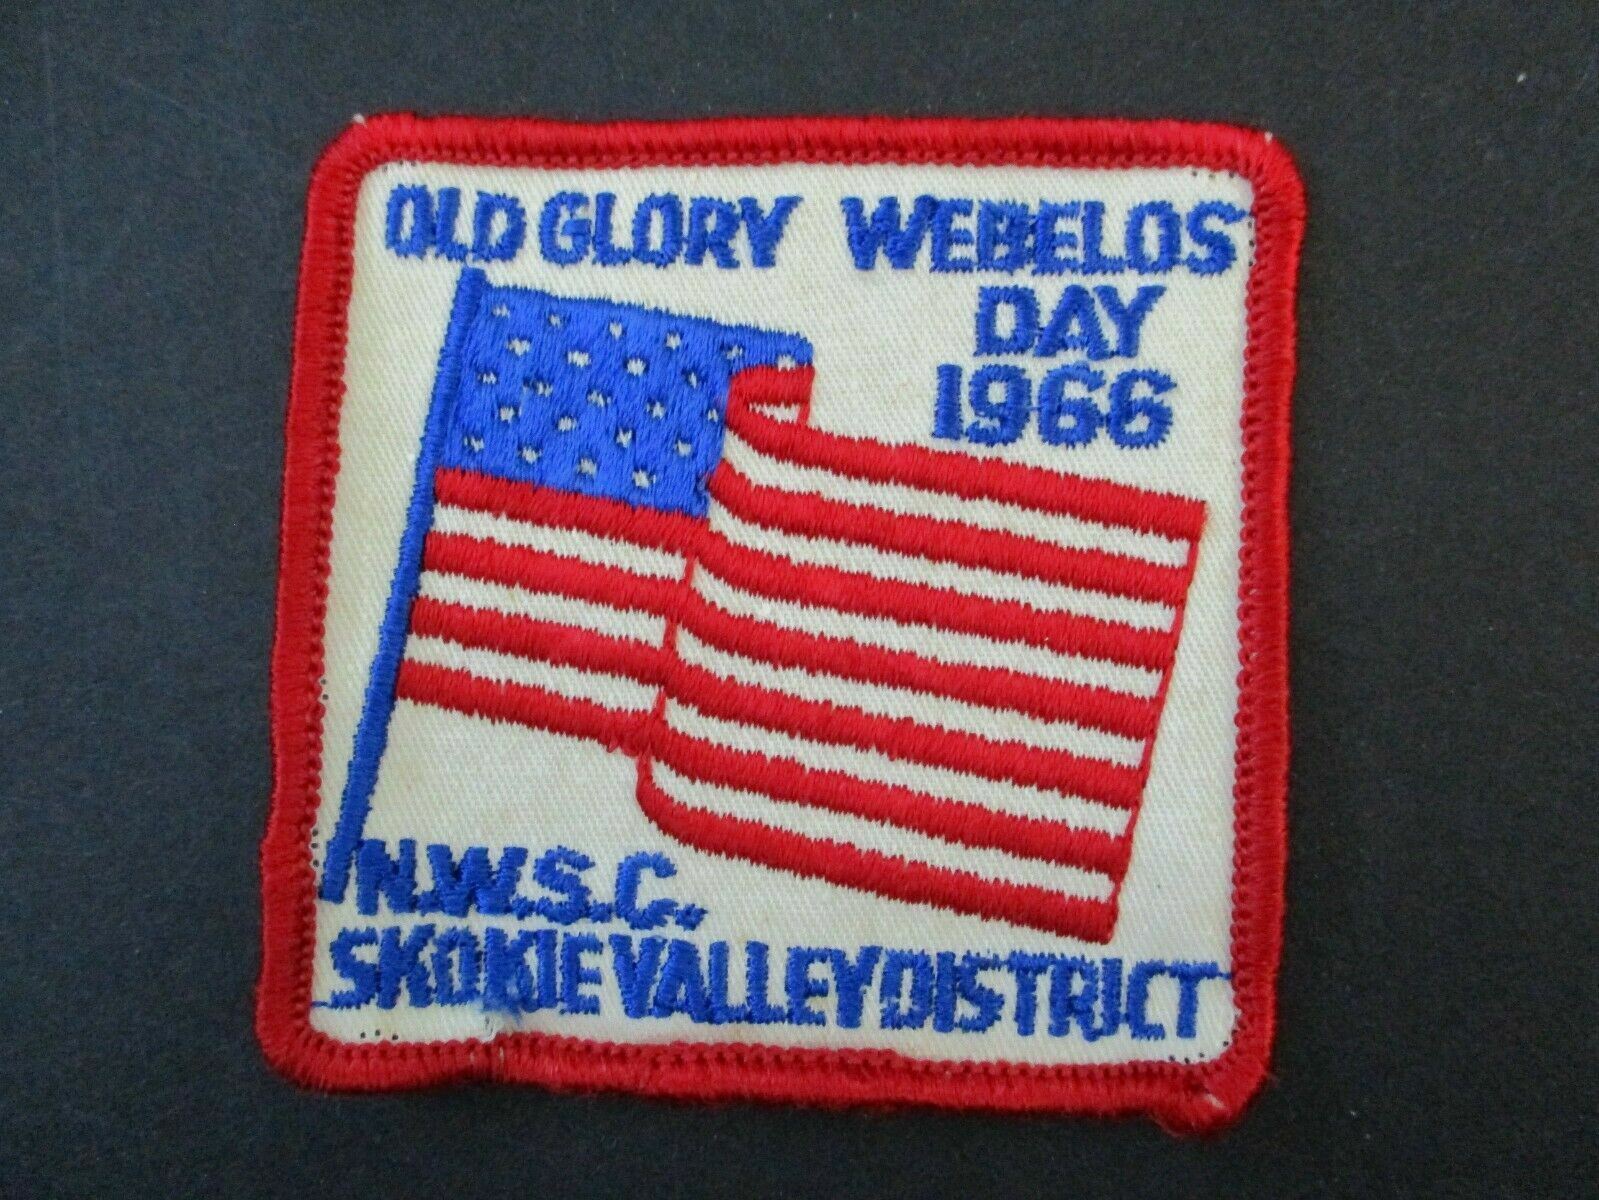 1966 Old Glory Webelos Day Skokie Valley District 3inch patch